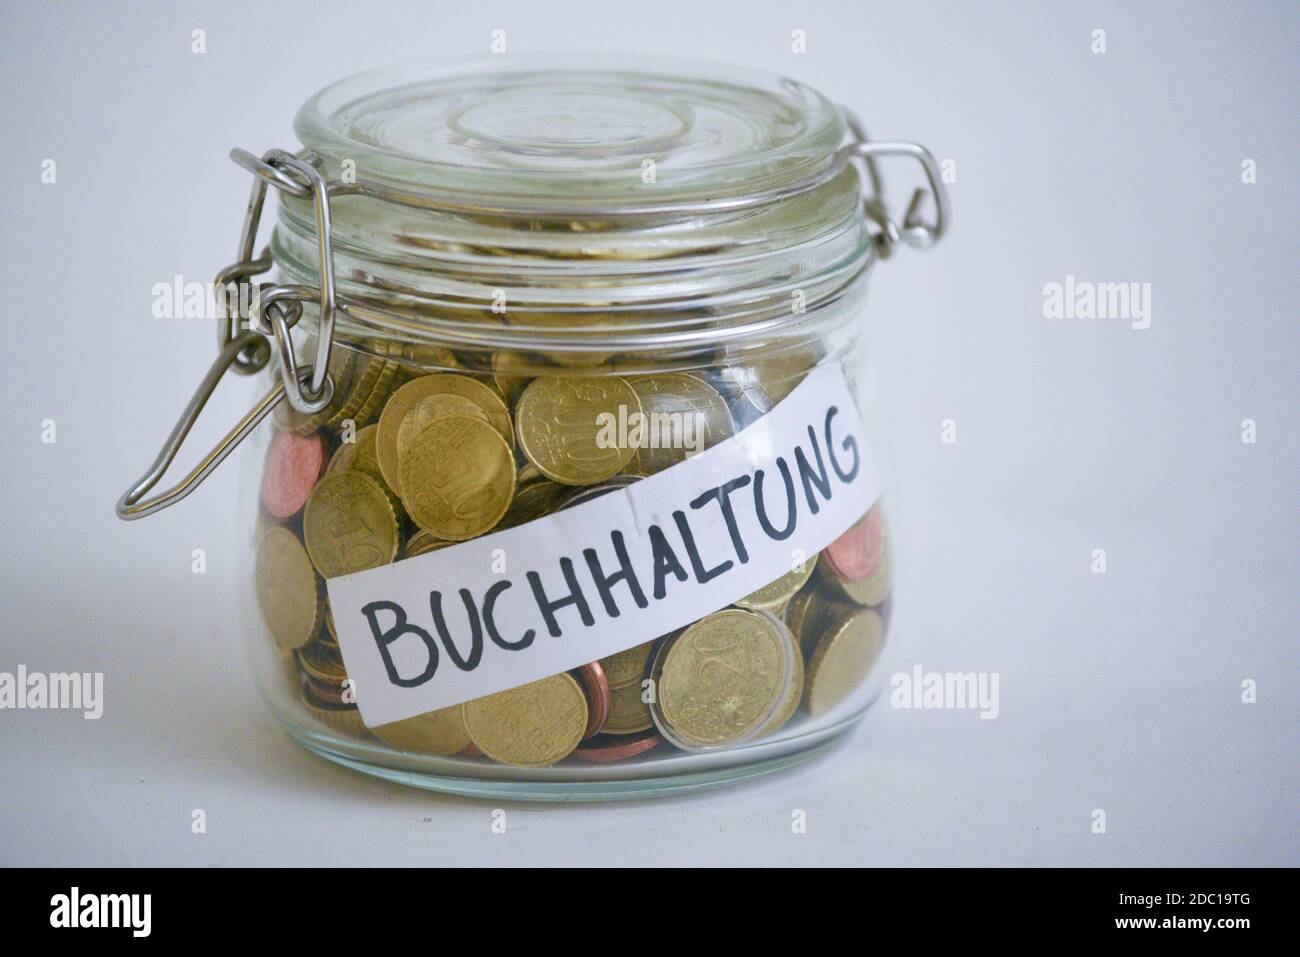 Jar full of coins with a label saying 'Buchhaltung' (accounting) Stock Photo